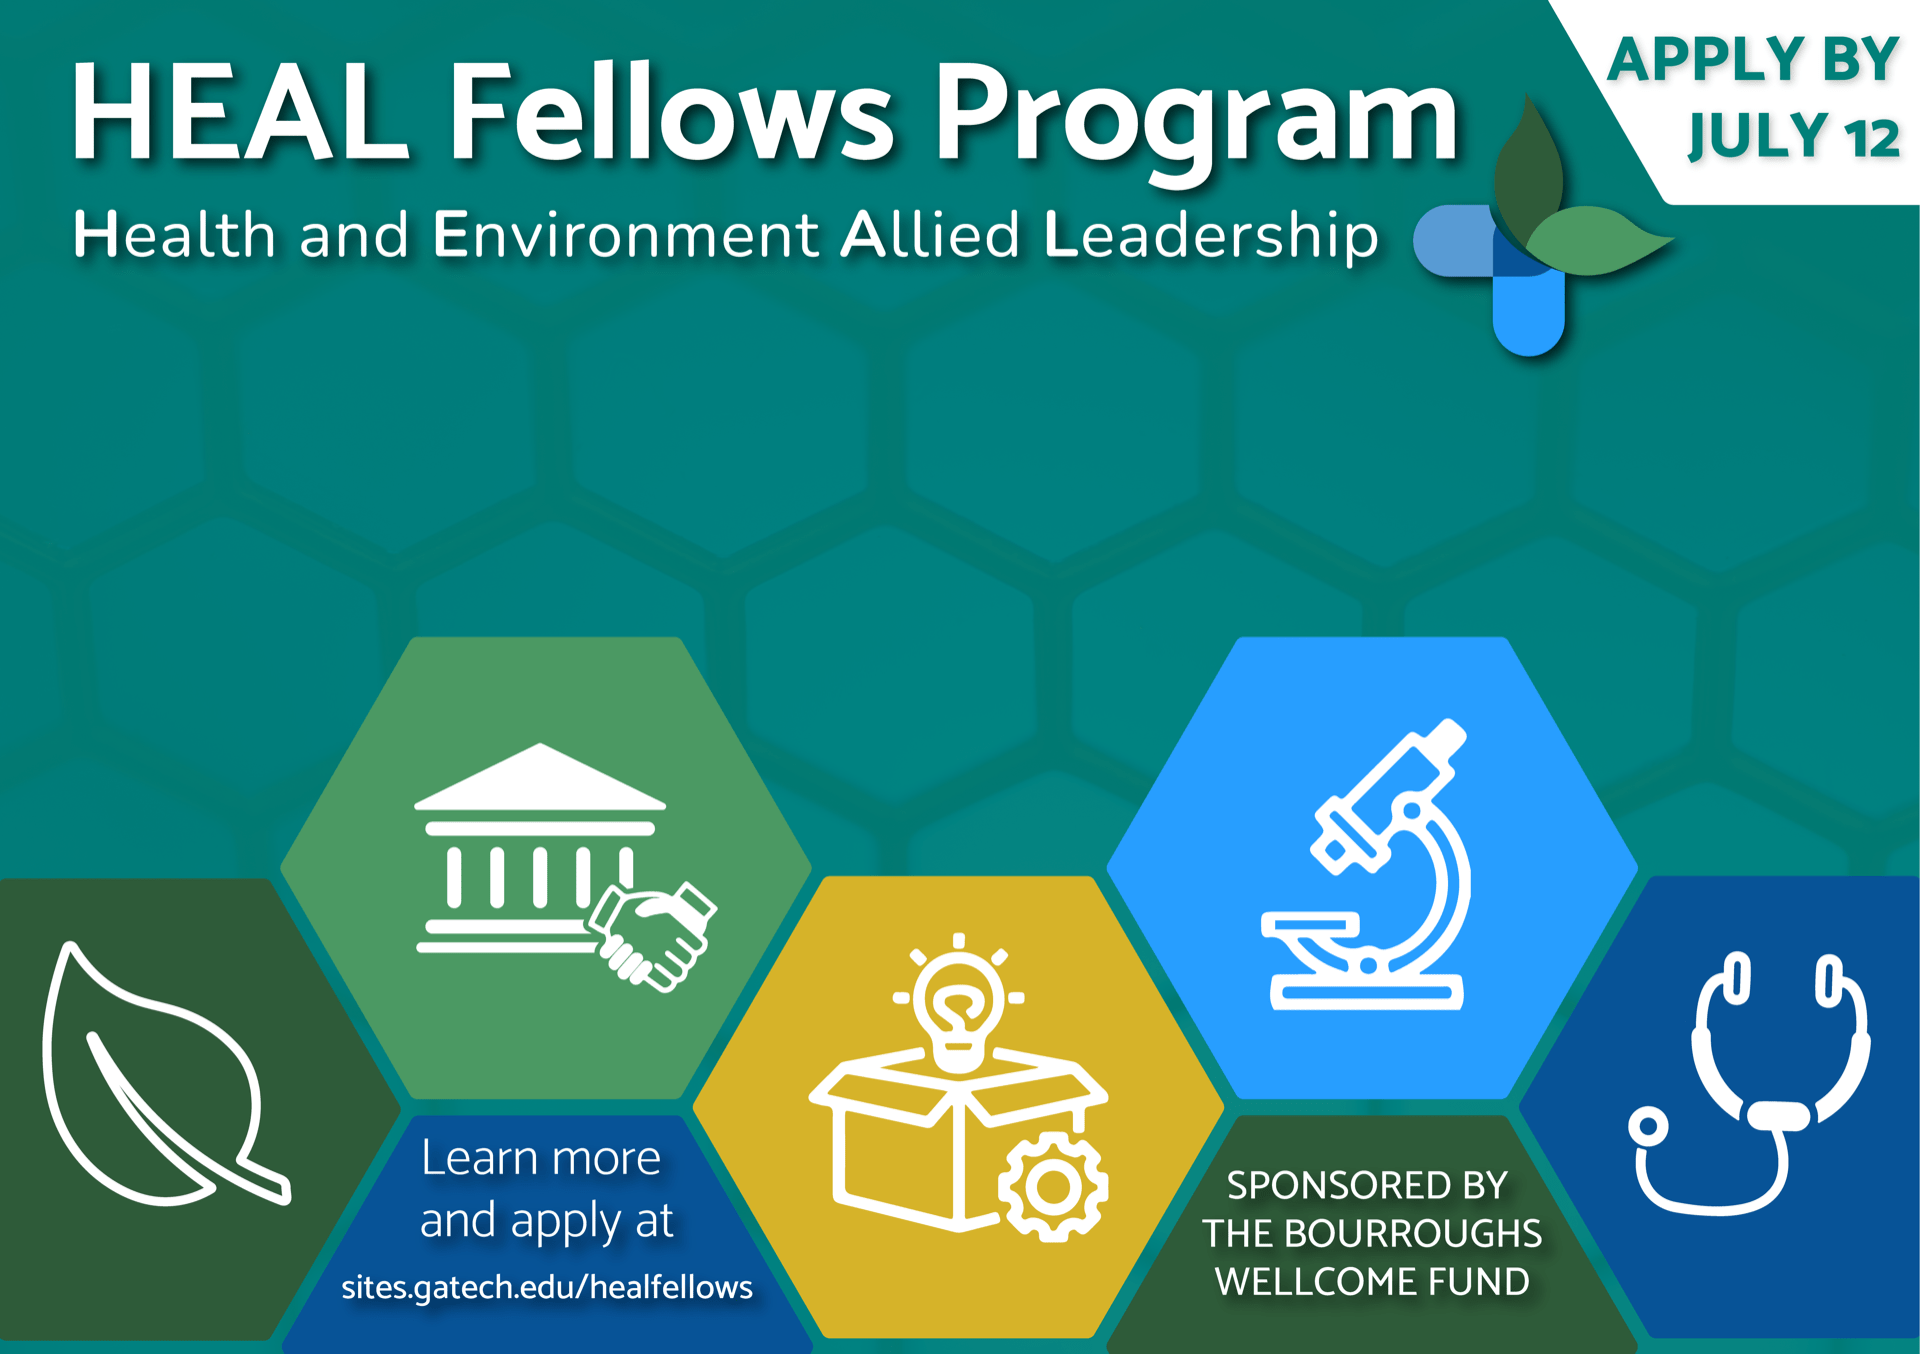 Health and Environment Allied Leadership (HEAL) Fellows Program officially announced – apply by July 12